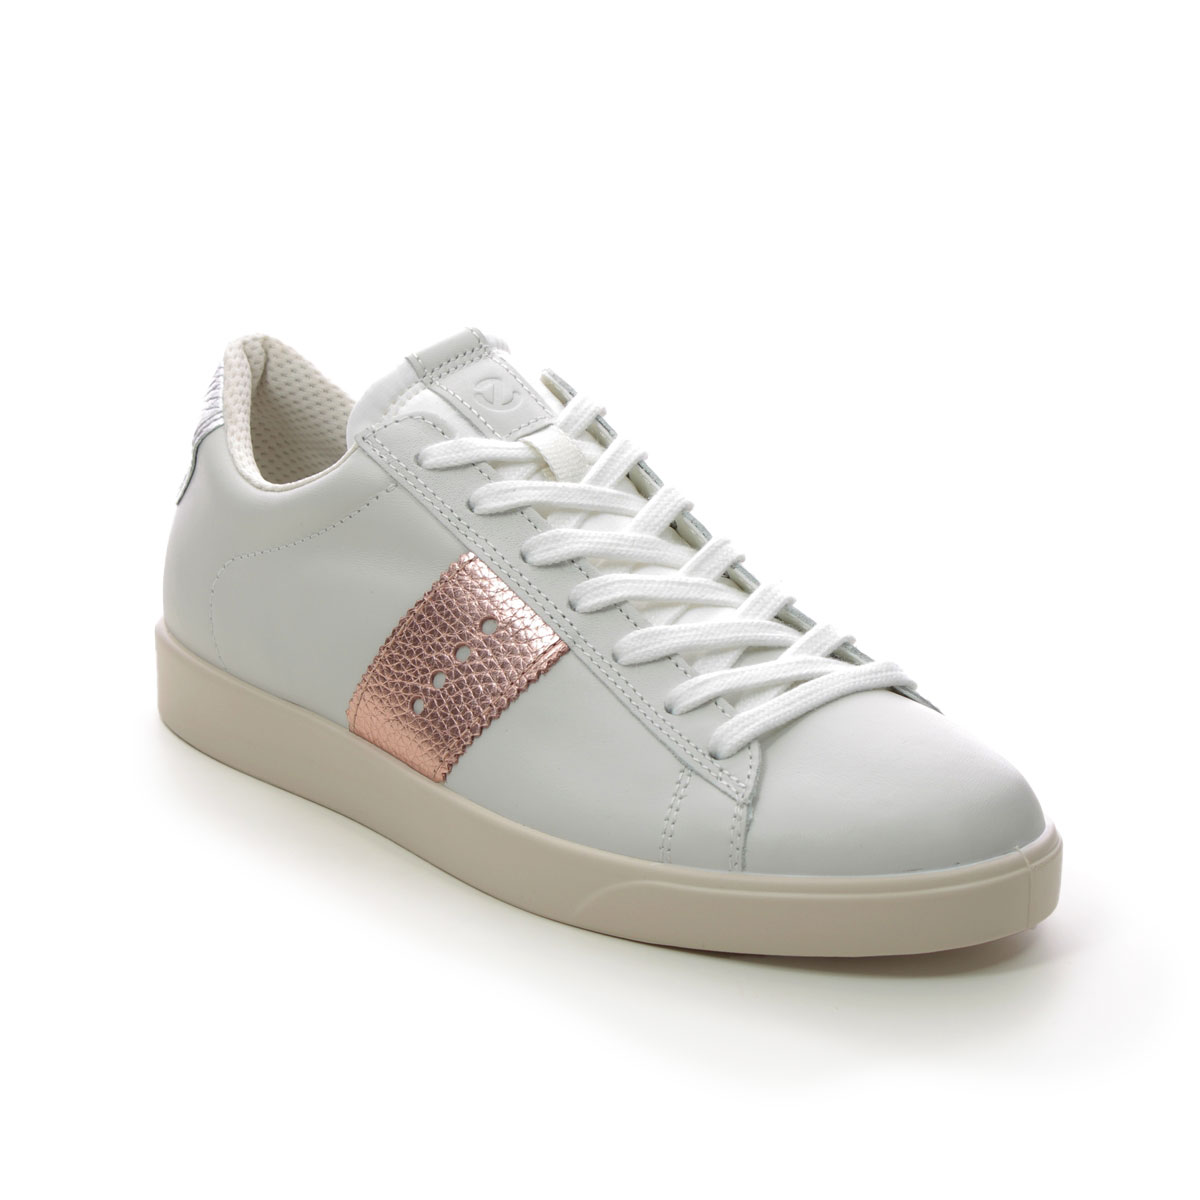 Ecco Street Lite Womens White Rose Gold Womens Trainers 212803-60717 In Size 37 In Plain White Rose Gold